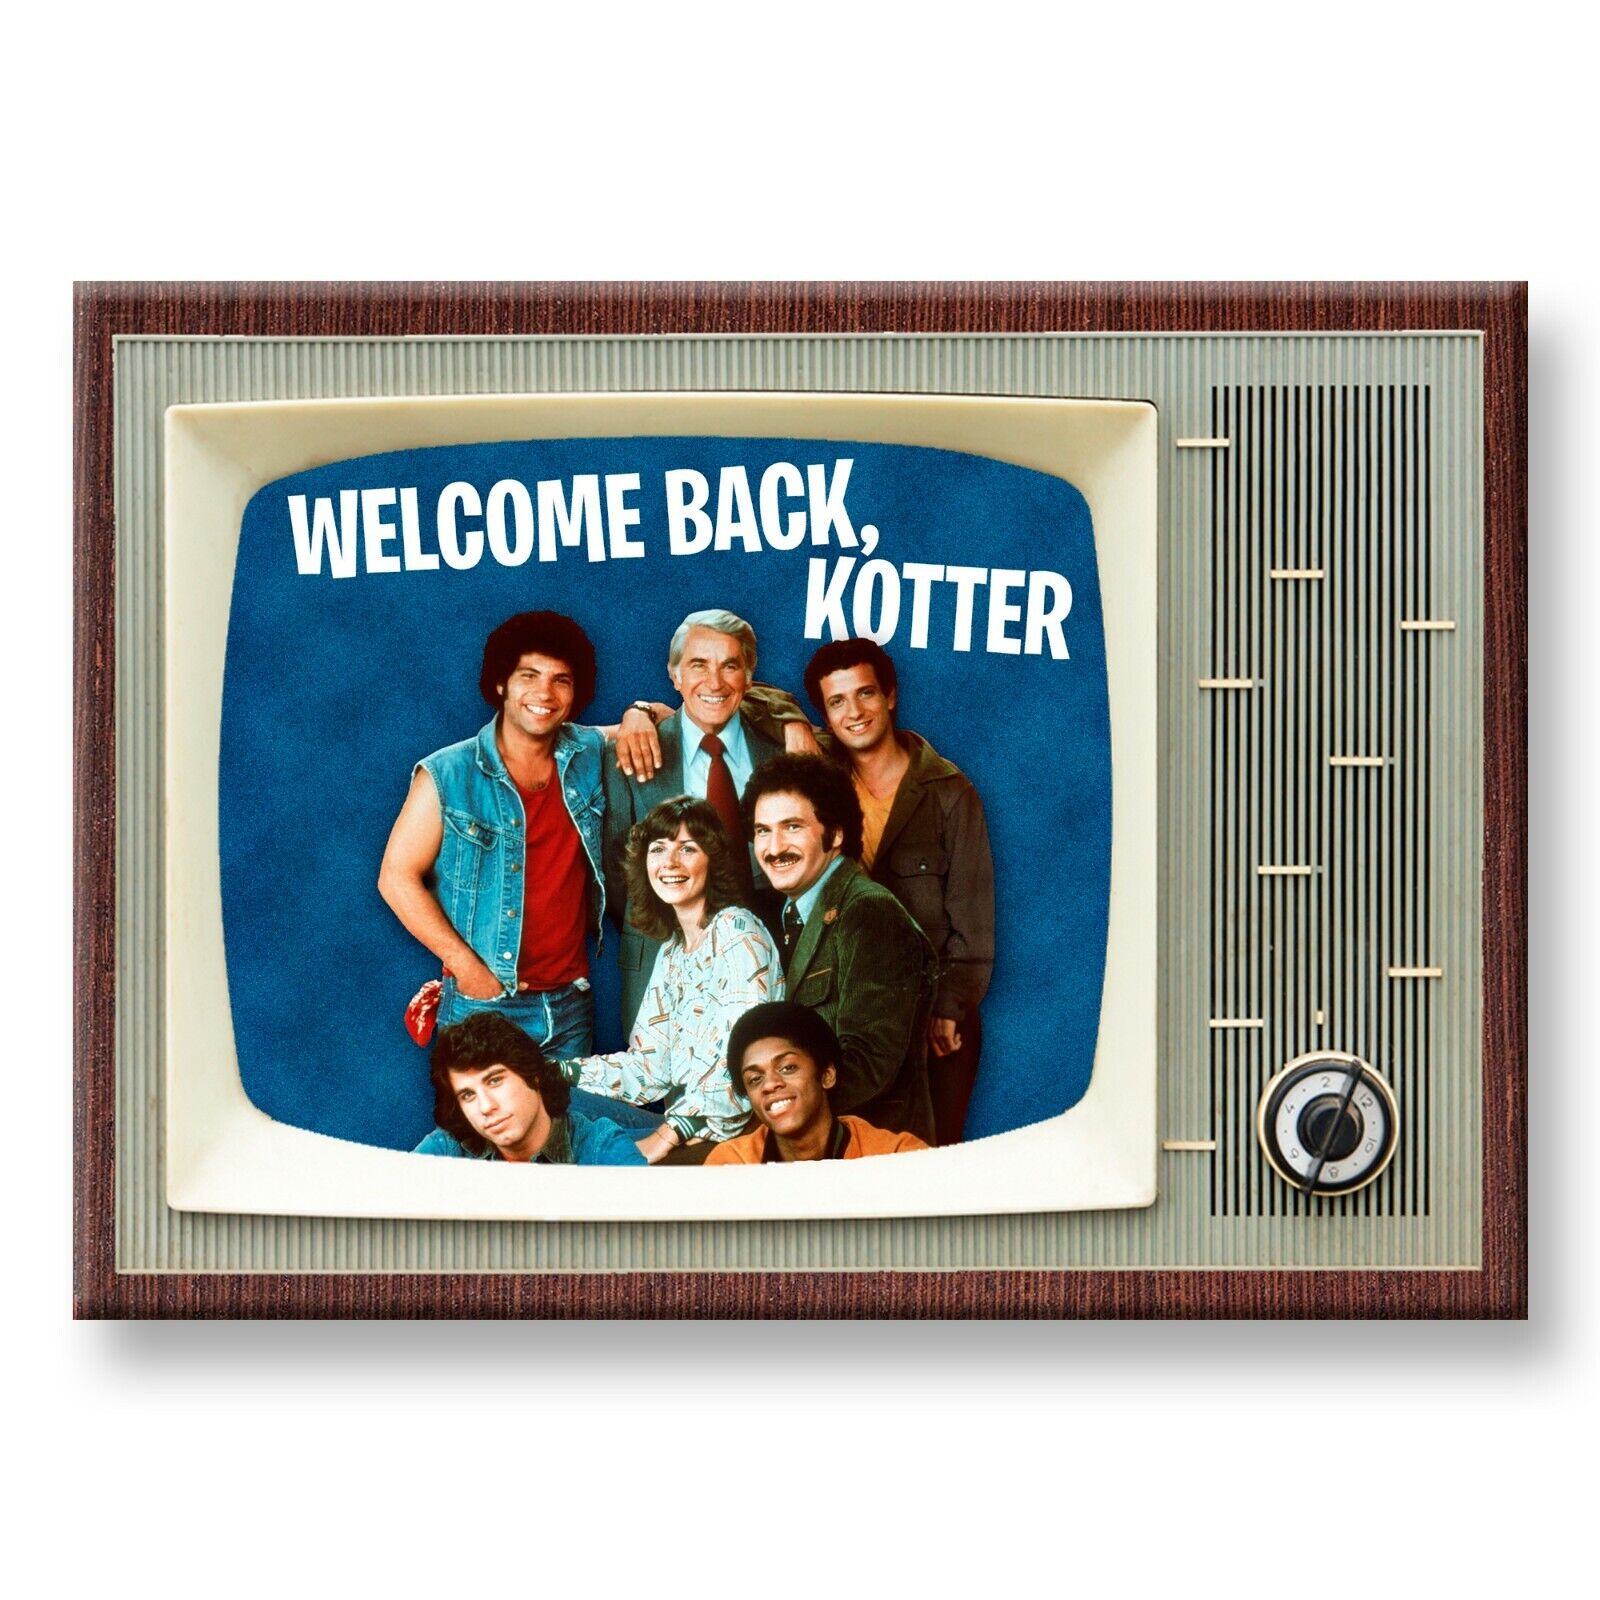 WELCOME BACK KOTTER Classic TV 3.5 inches x 2.5 inches Steel Cased FRIDGE MAGNET